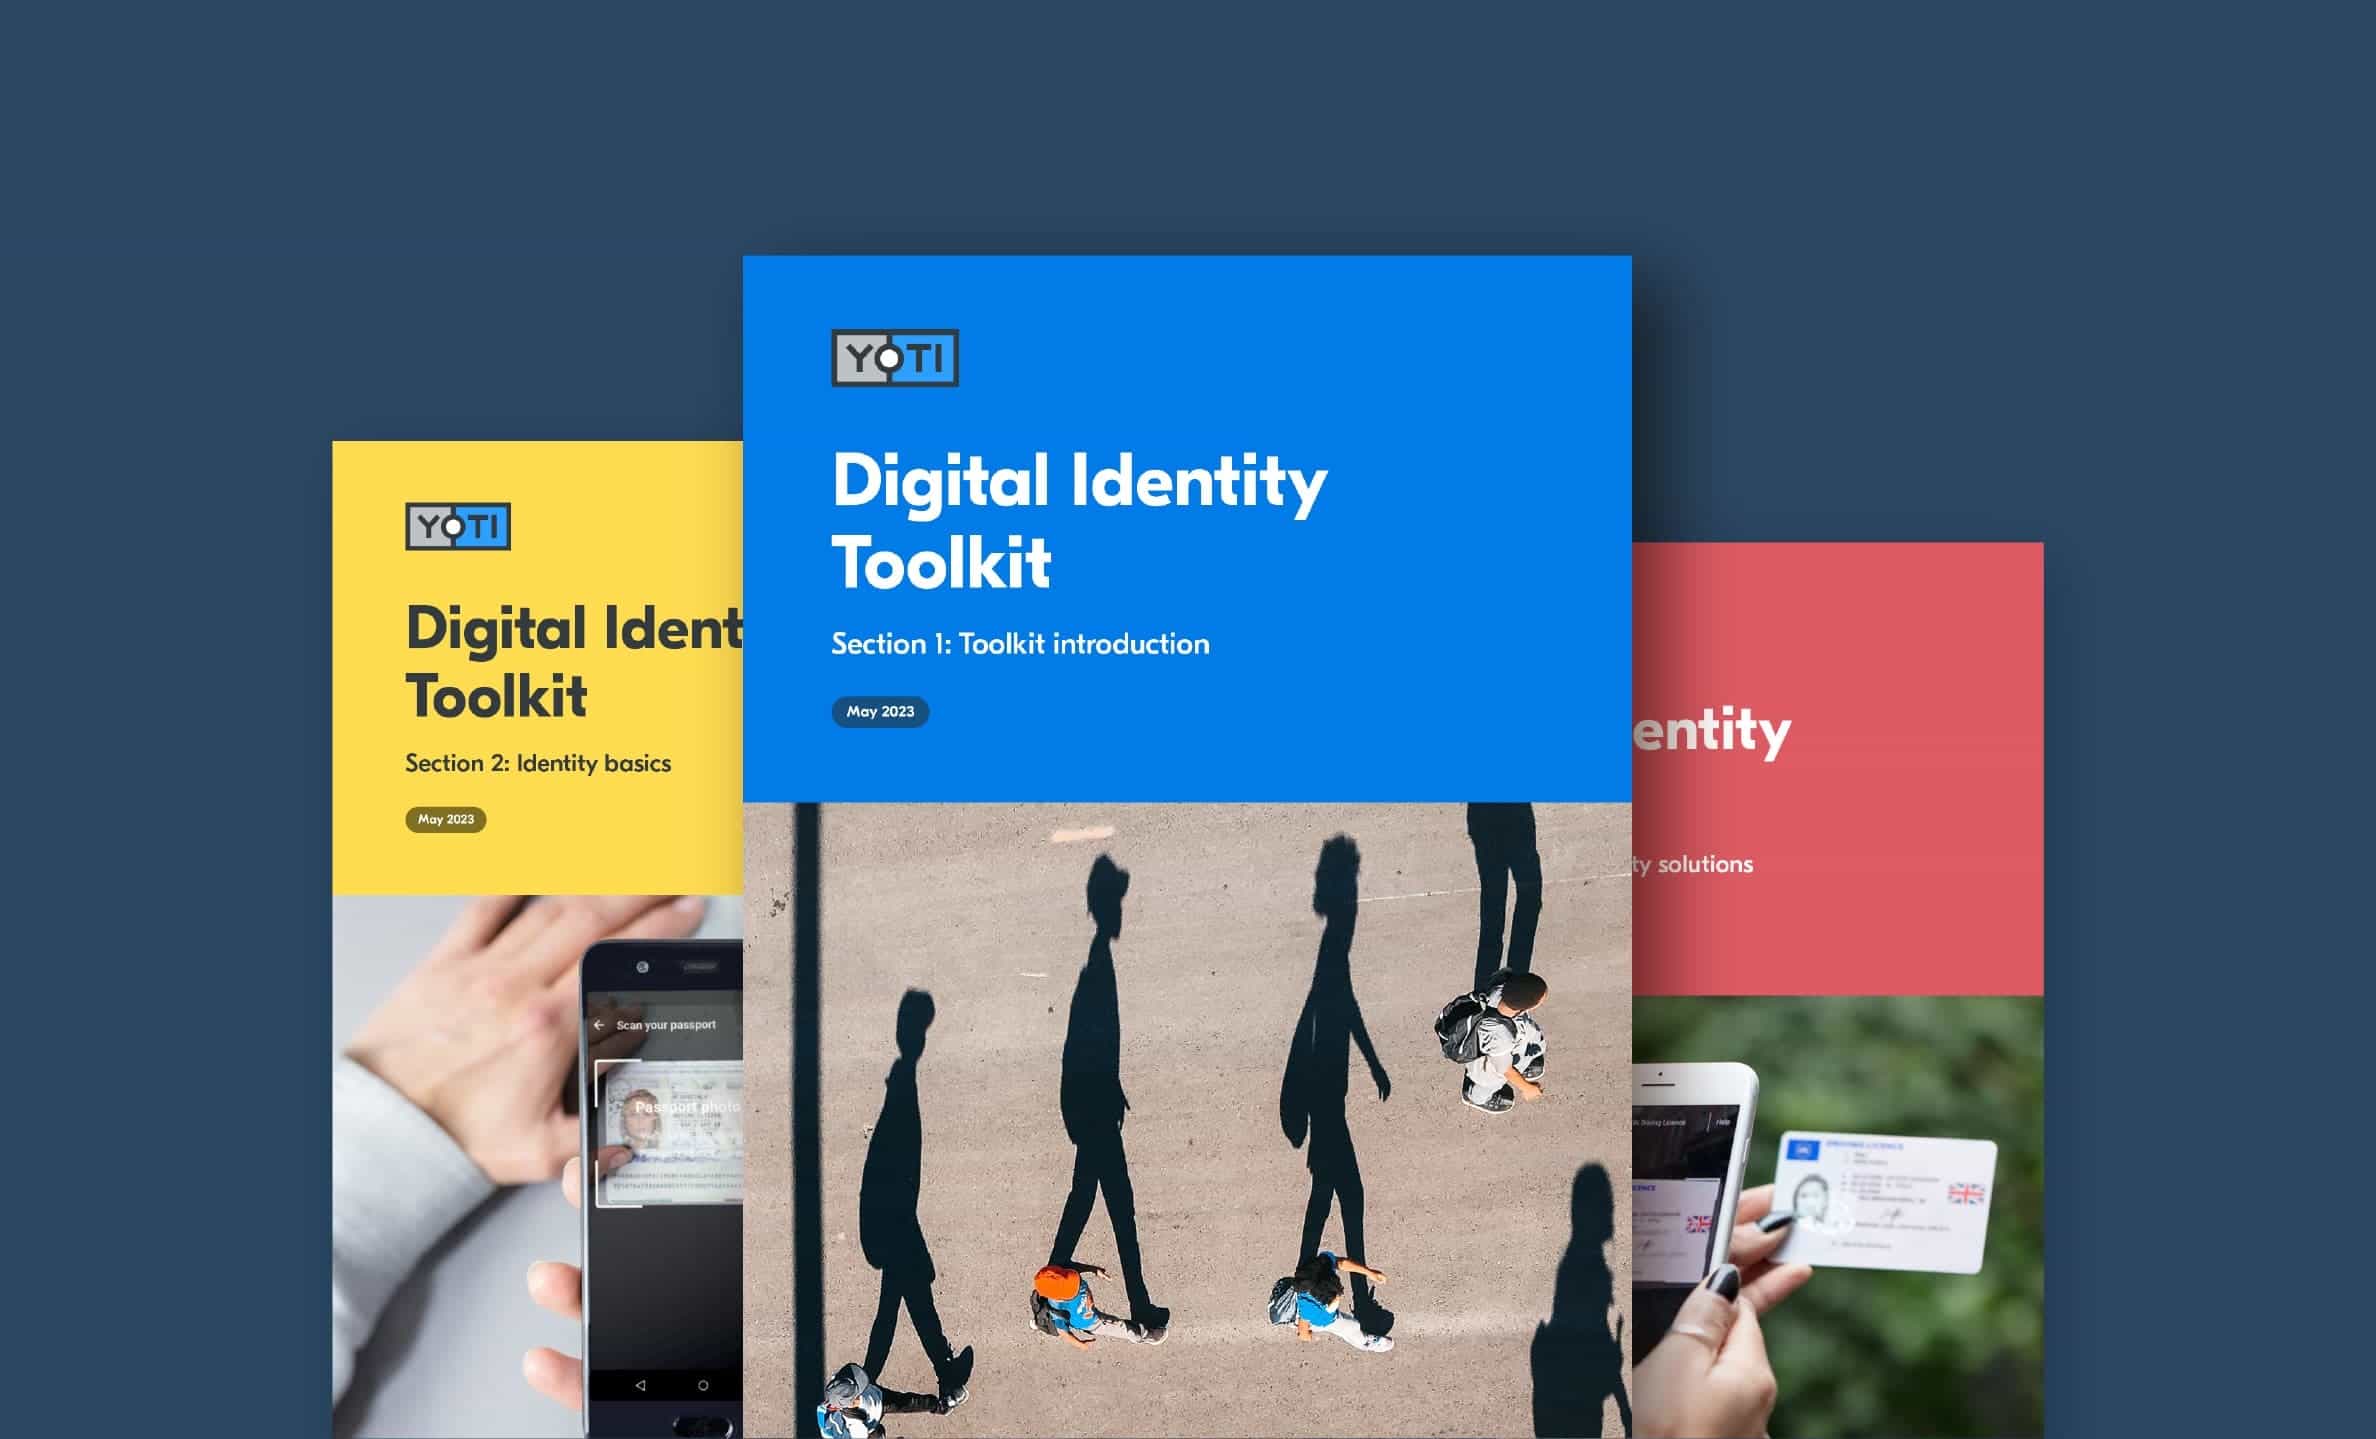 Front covers for three of the sections of the Yoti digital identity toolkit